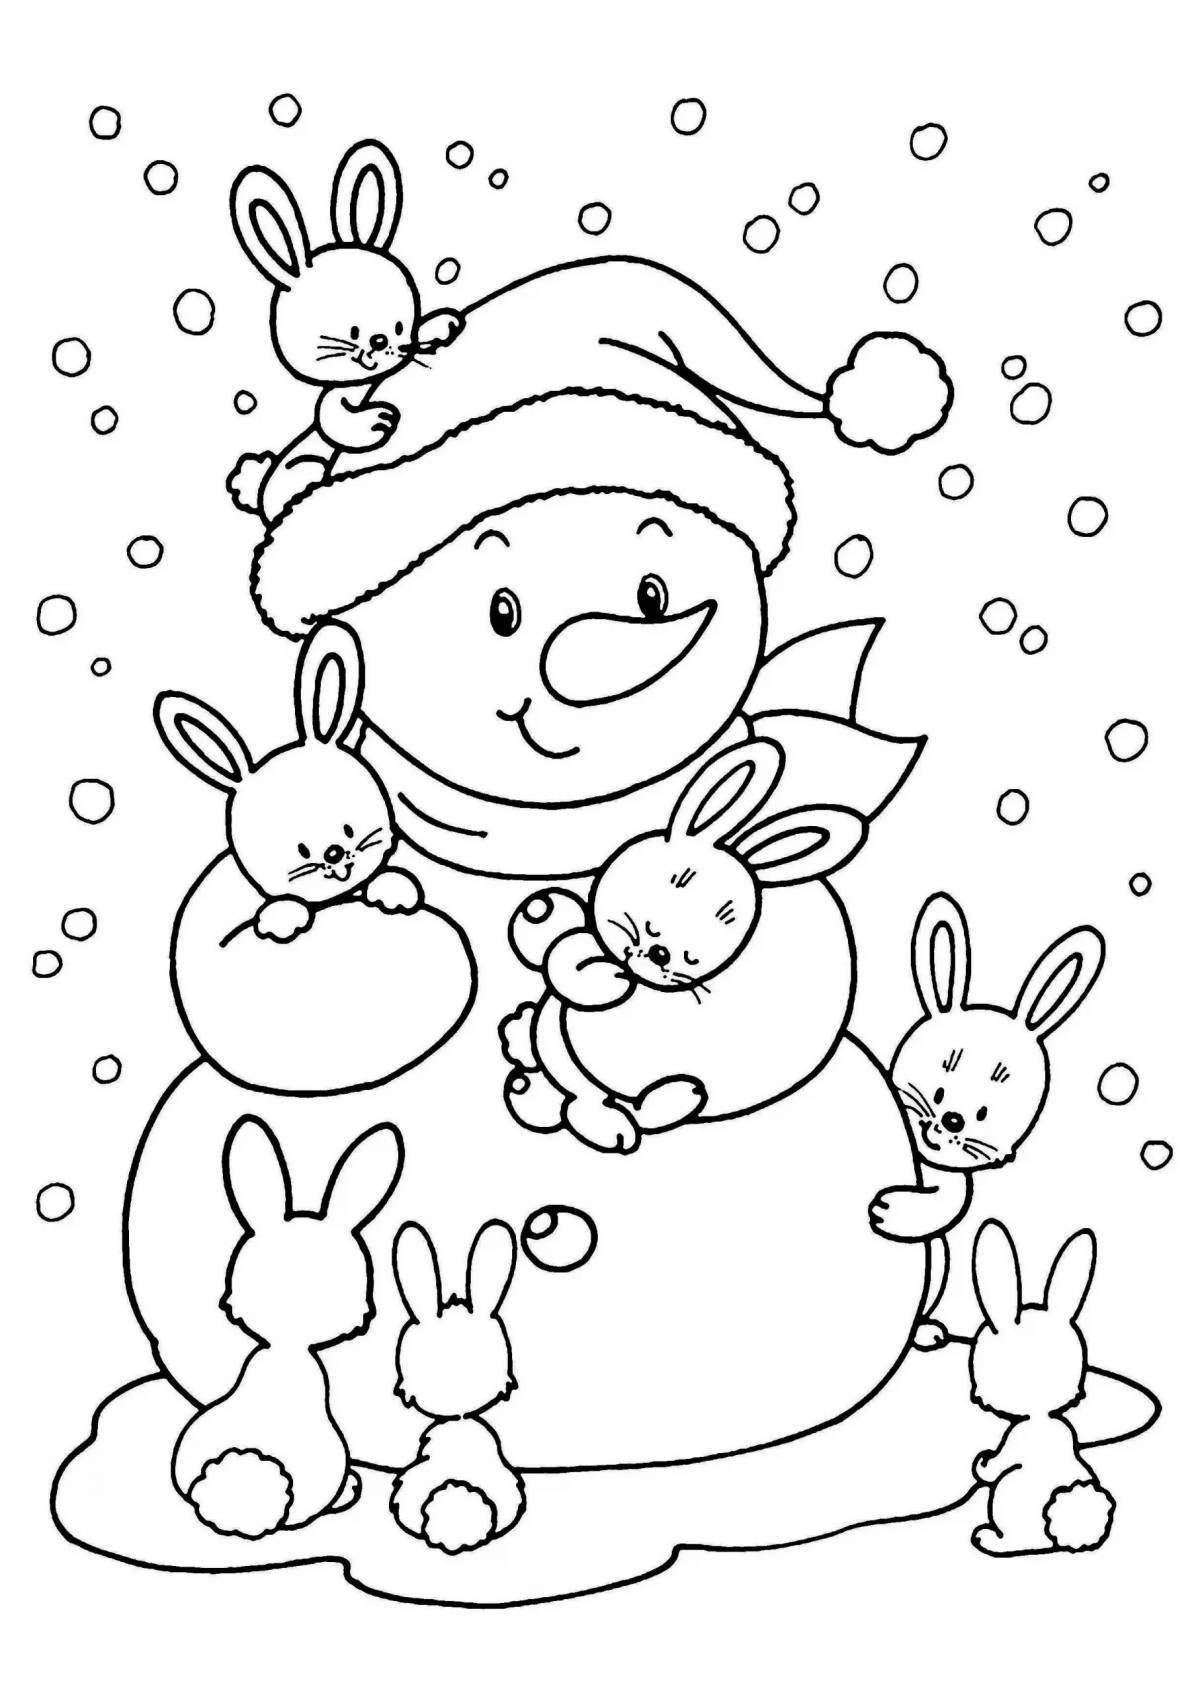 Merry Christmas coloring book for mom